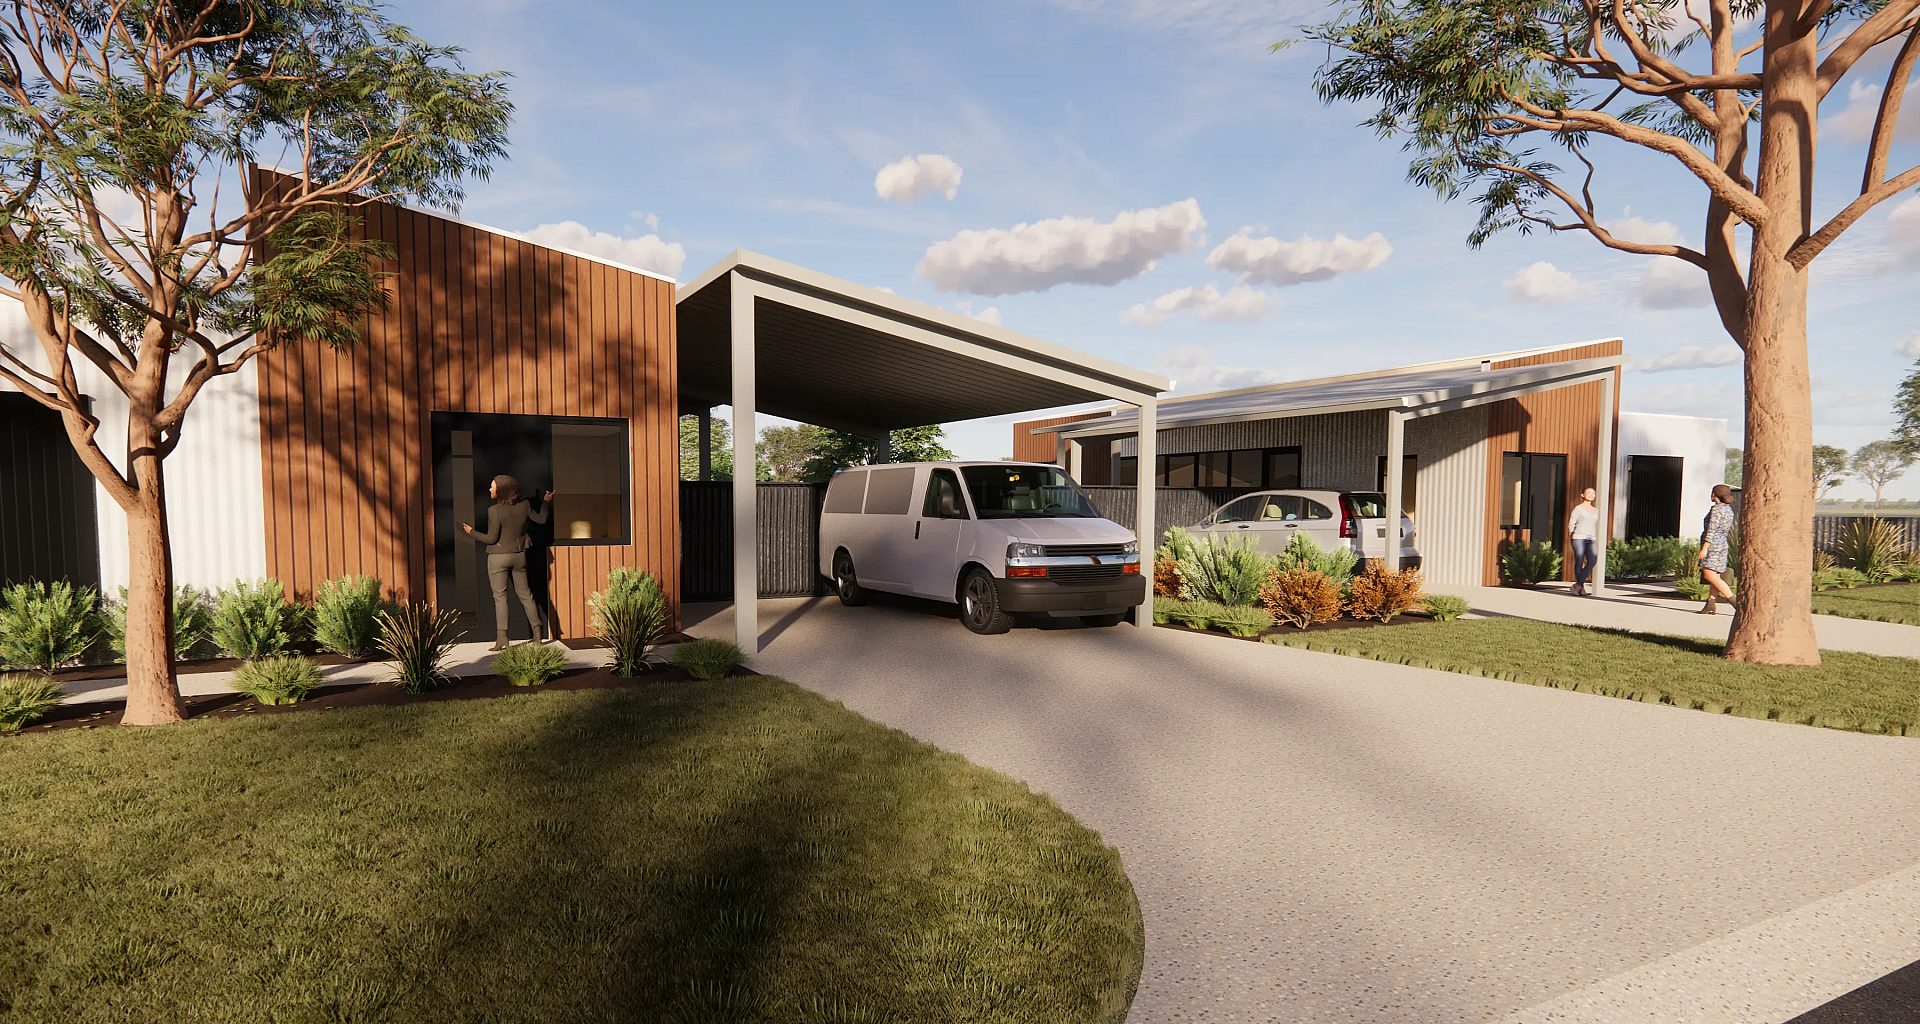 A render of the Wonthella property driveway with a van parked under cover.